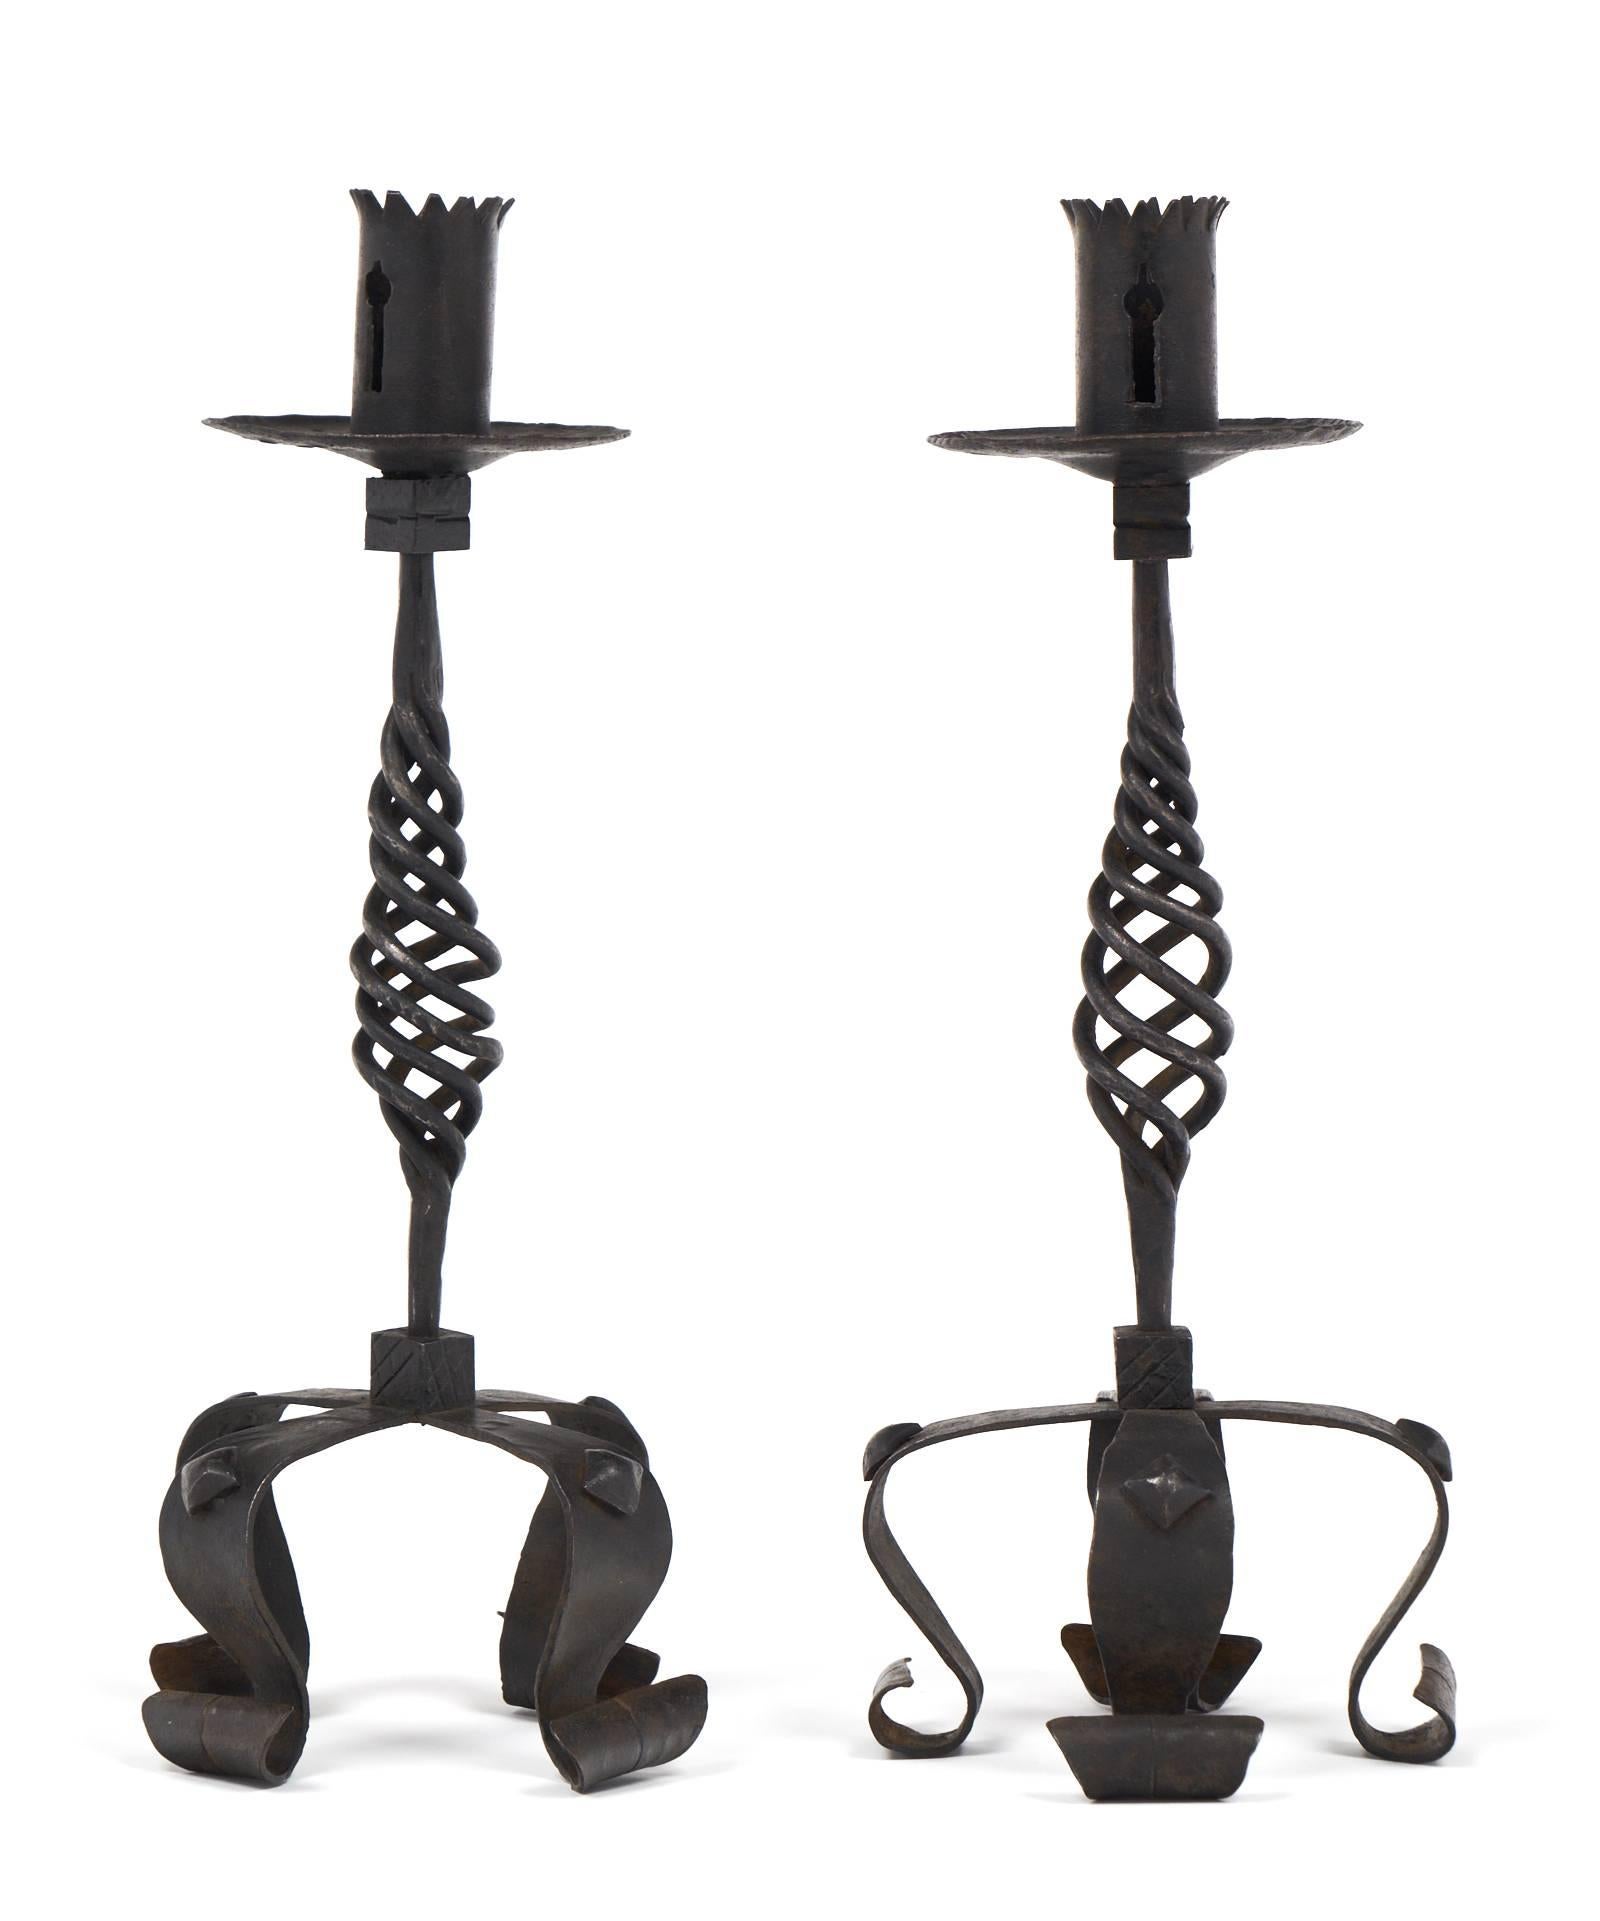 Renaissance Revival Vintage Pair of Forged Iron Candlesticks